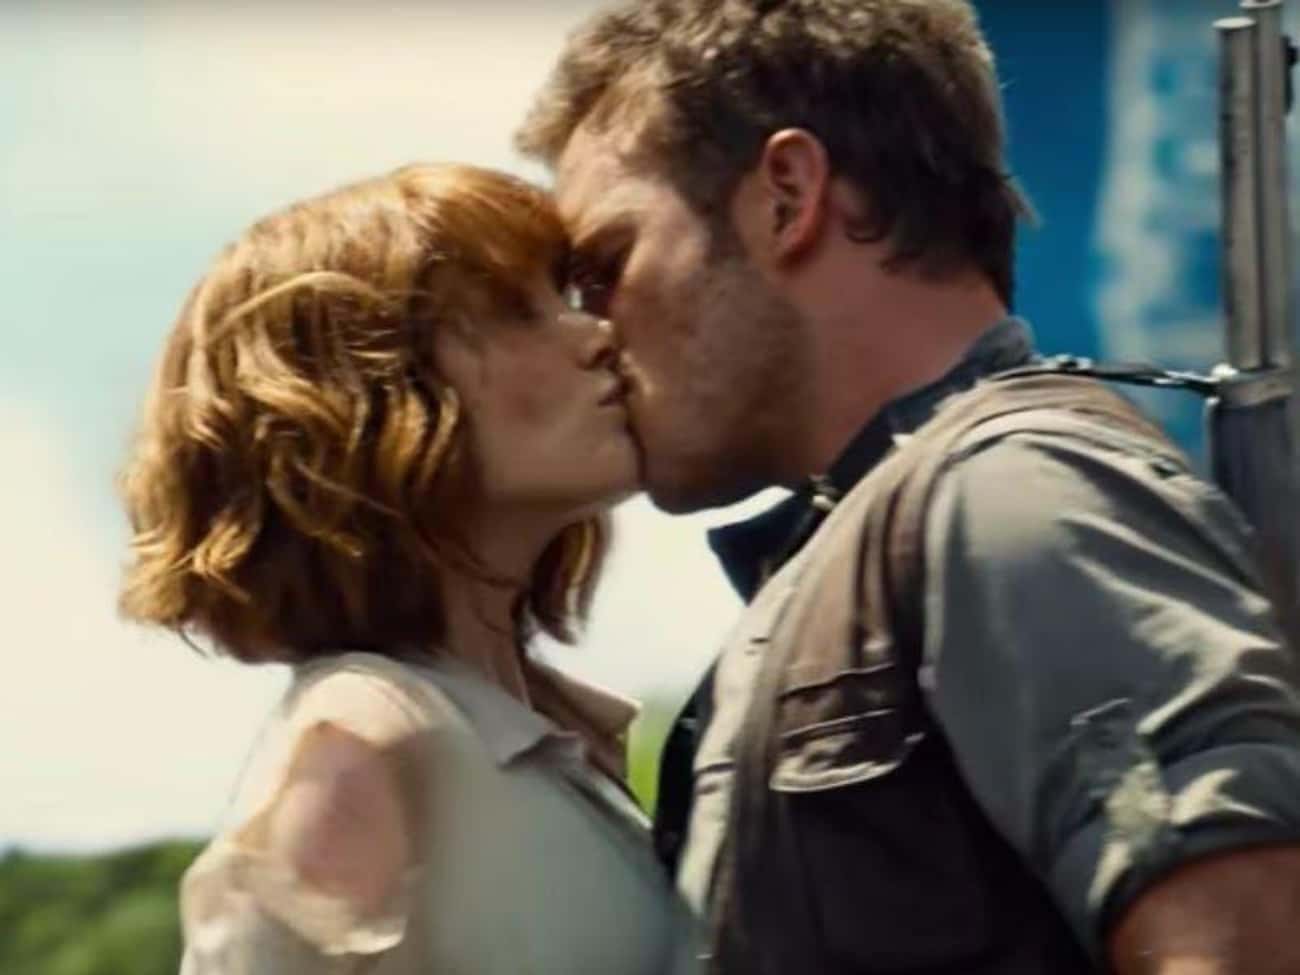 Hundreds Of Crew Members Cheered After Chris Pratt And Bryce Dallas Howard's Characters From 'Jurassic World' Finally Got To Kiss 